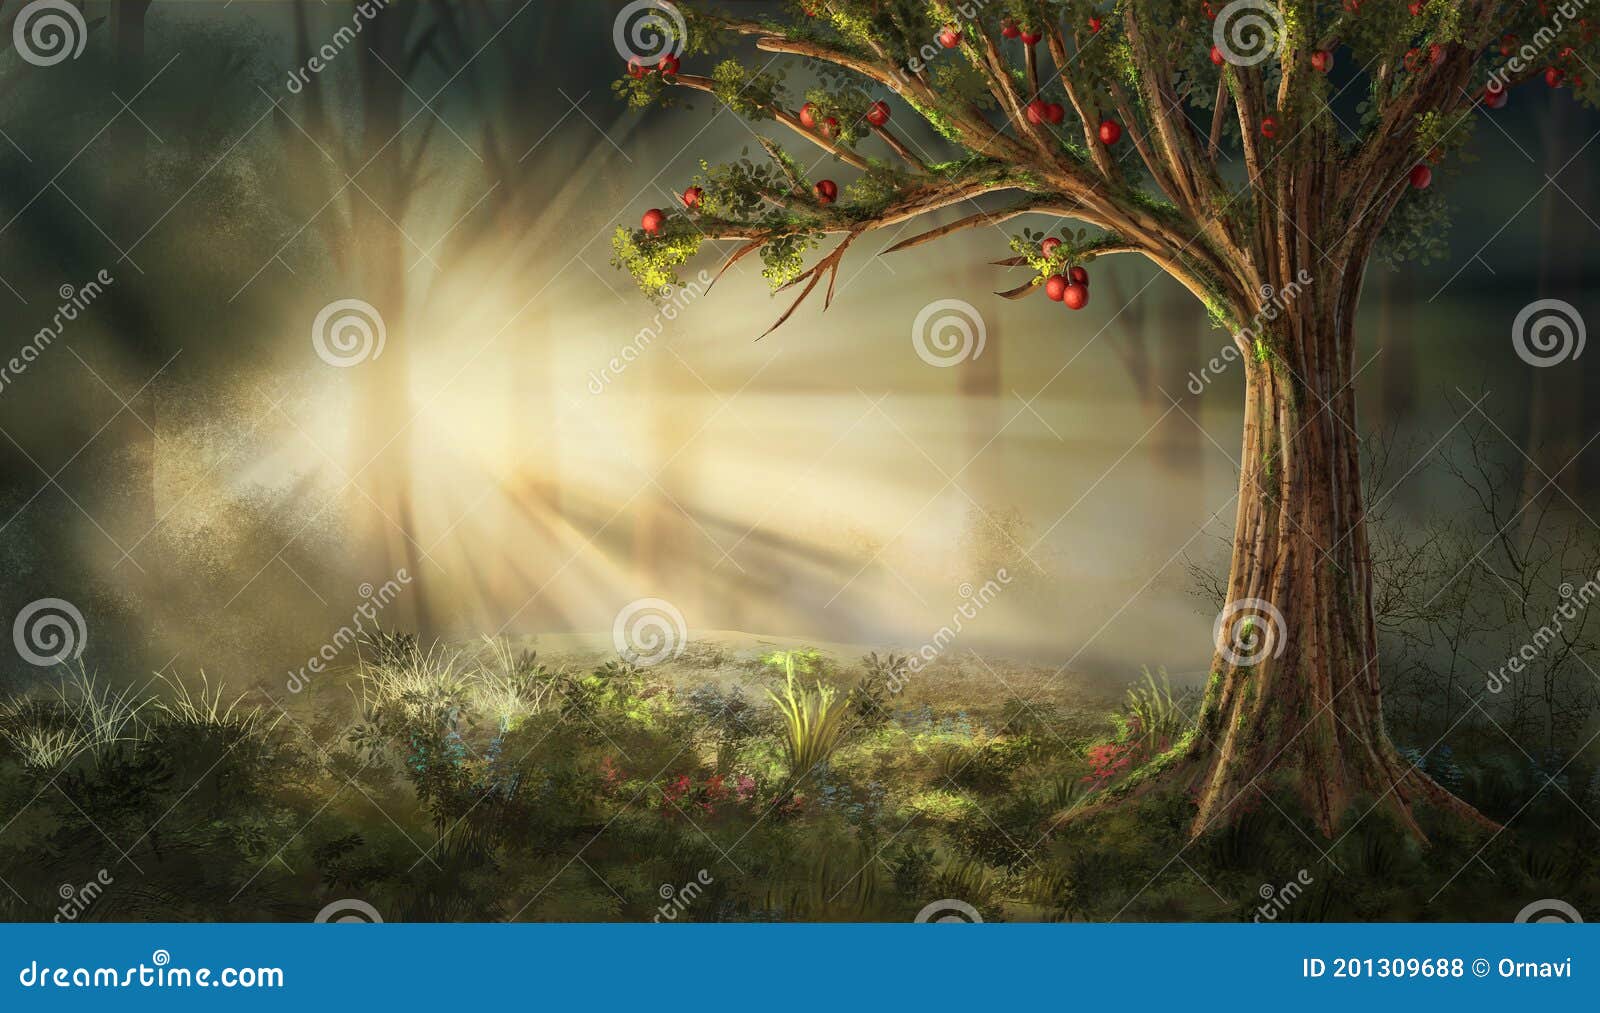 misty morning in the forest. the rays of the sun shining through the branches of trees width red fruits. digital art style.